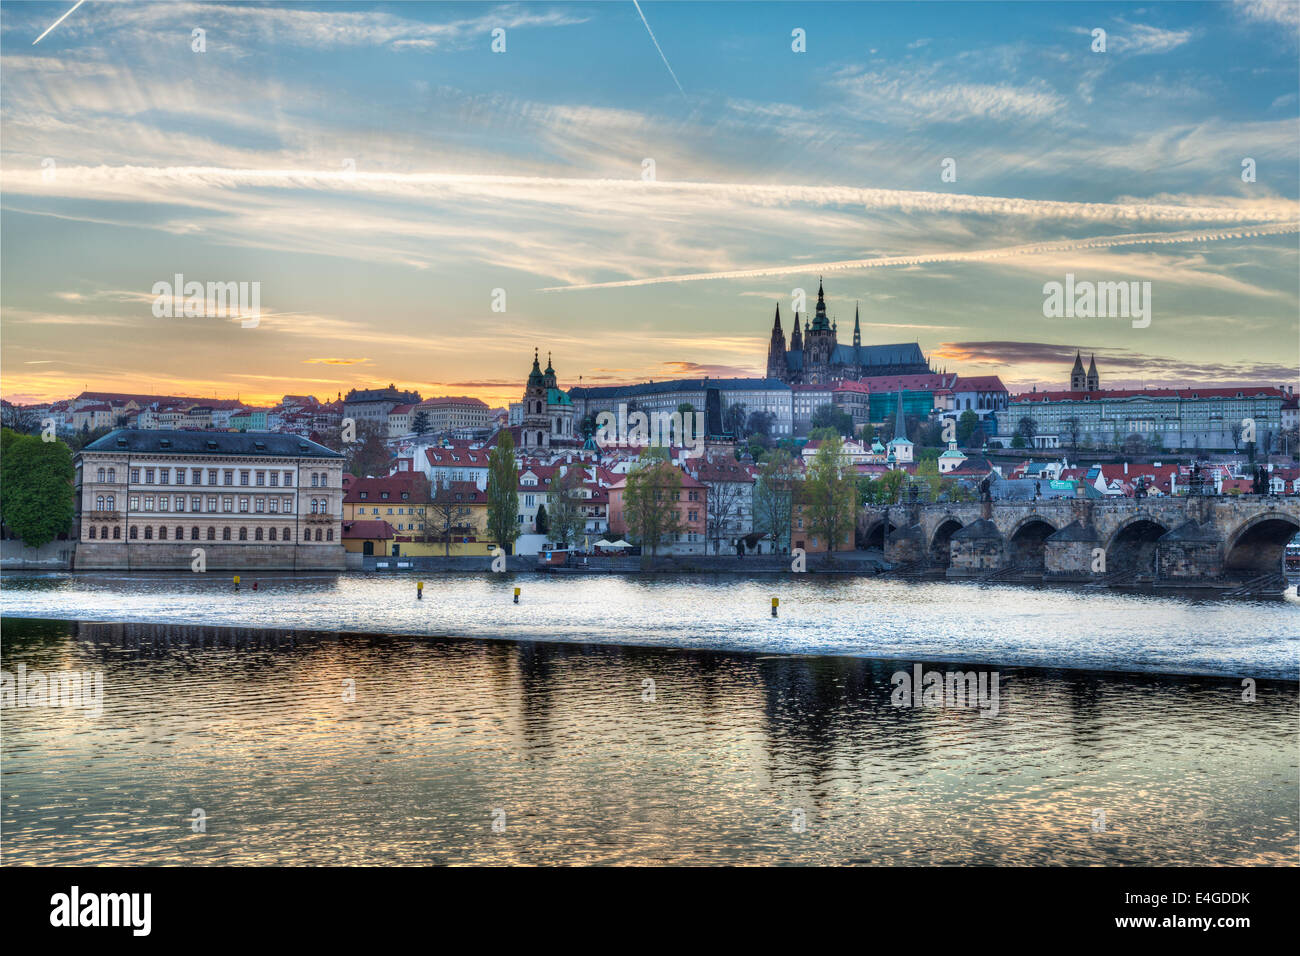 HDR image of view of Charles bridge over Vltava river and Gradchany (Prague Castle) and St. Vitus Cathedral Stock Photo